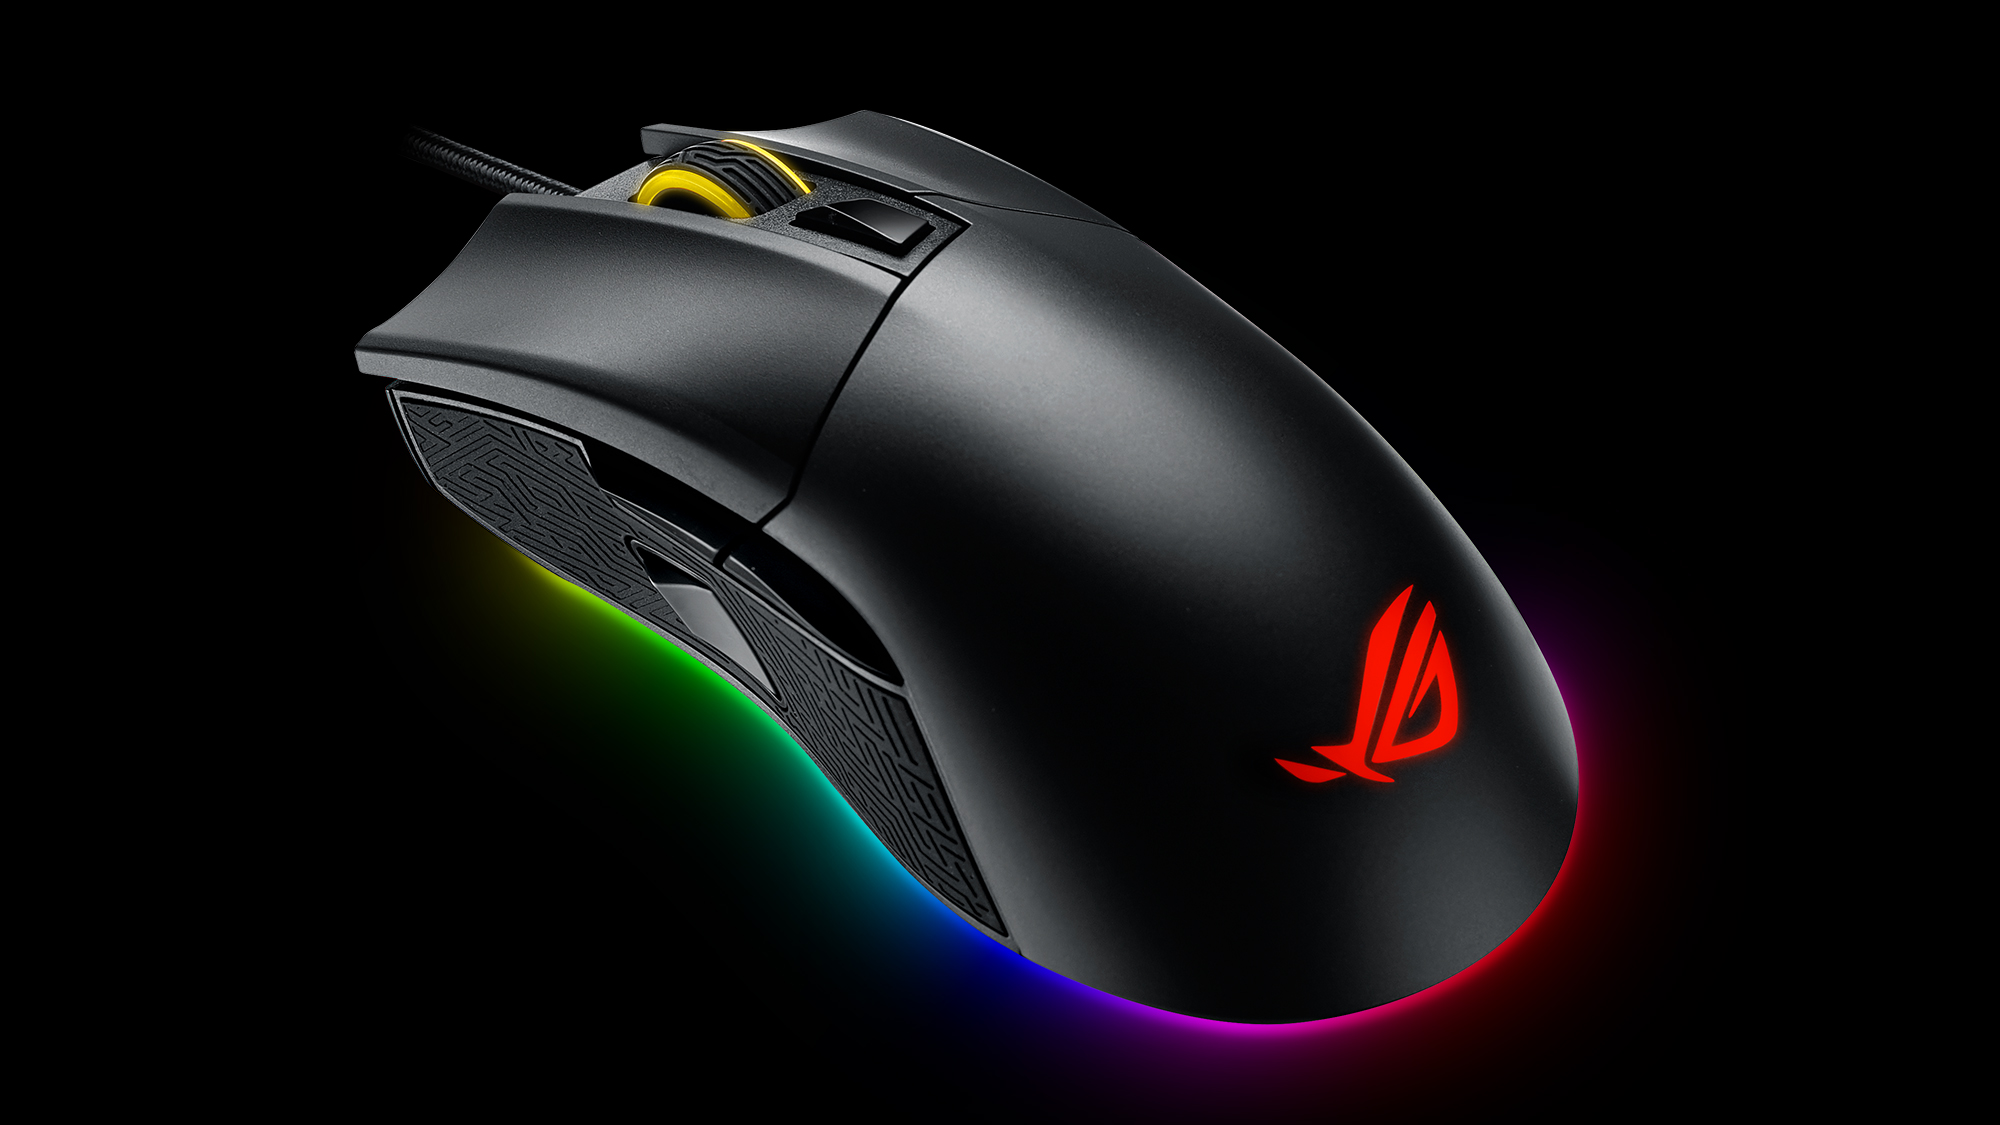 rog gaming mouse